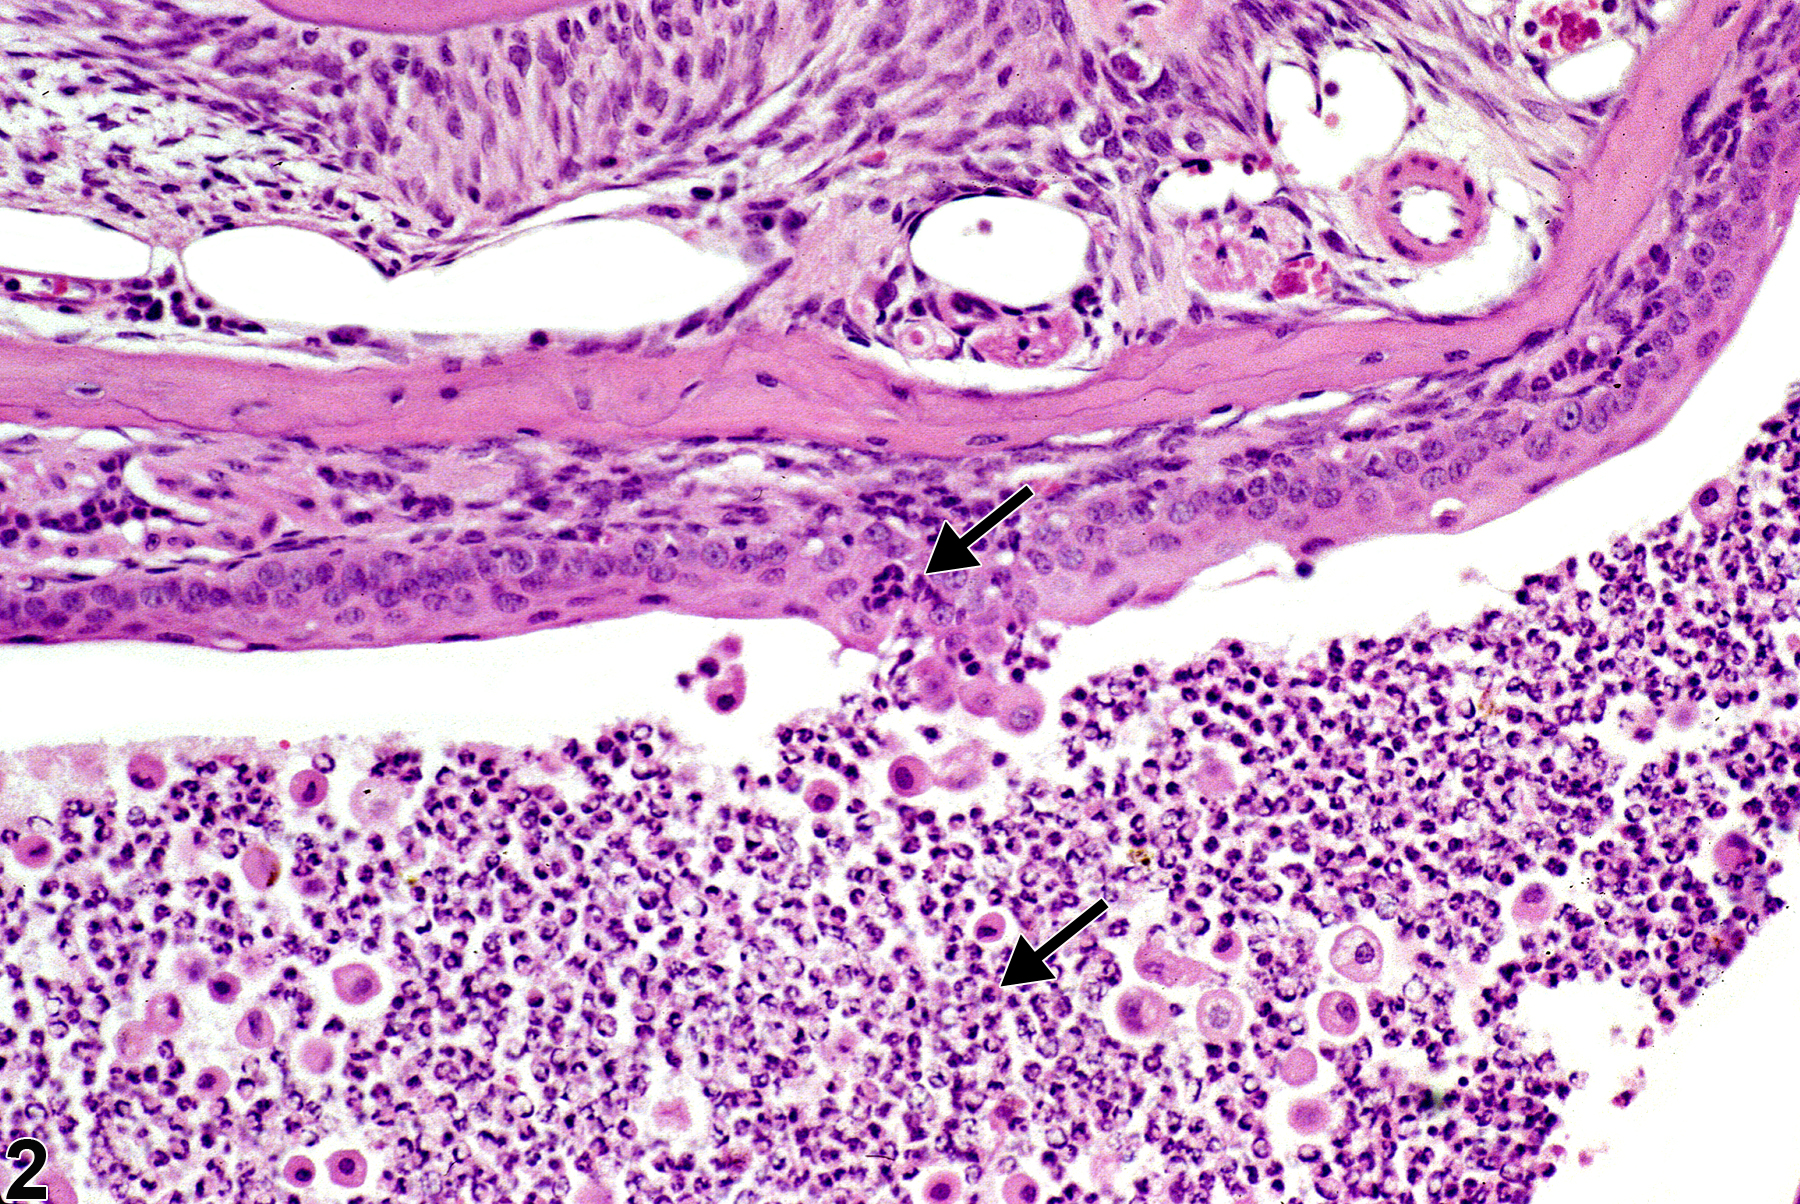 Image of inflammation in the lacrimal gland from a male B6C3F1 mouse in a chronic study